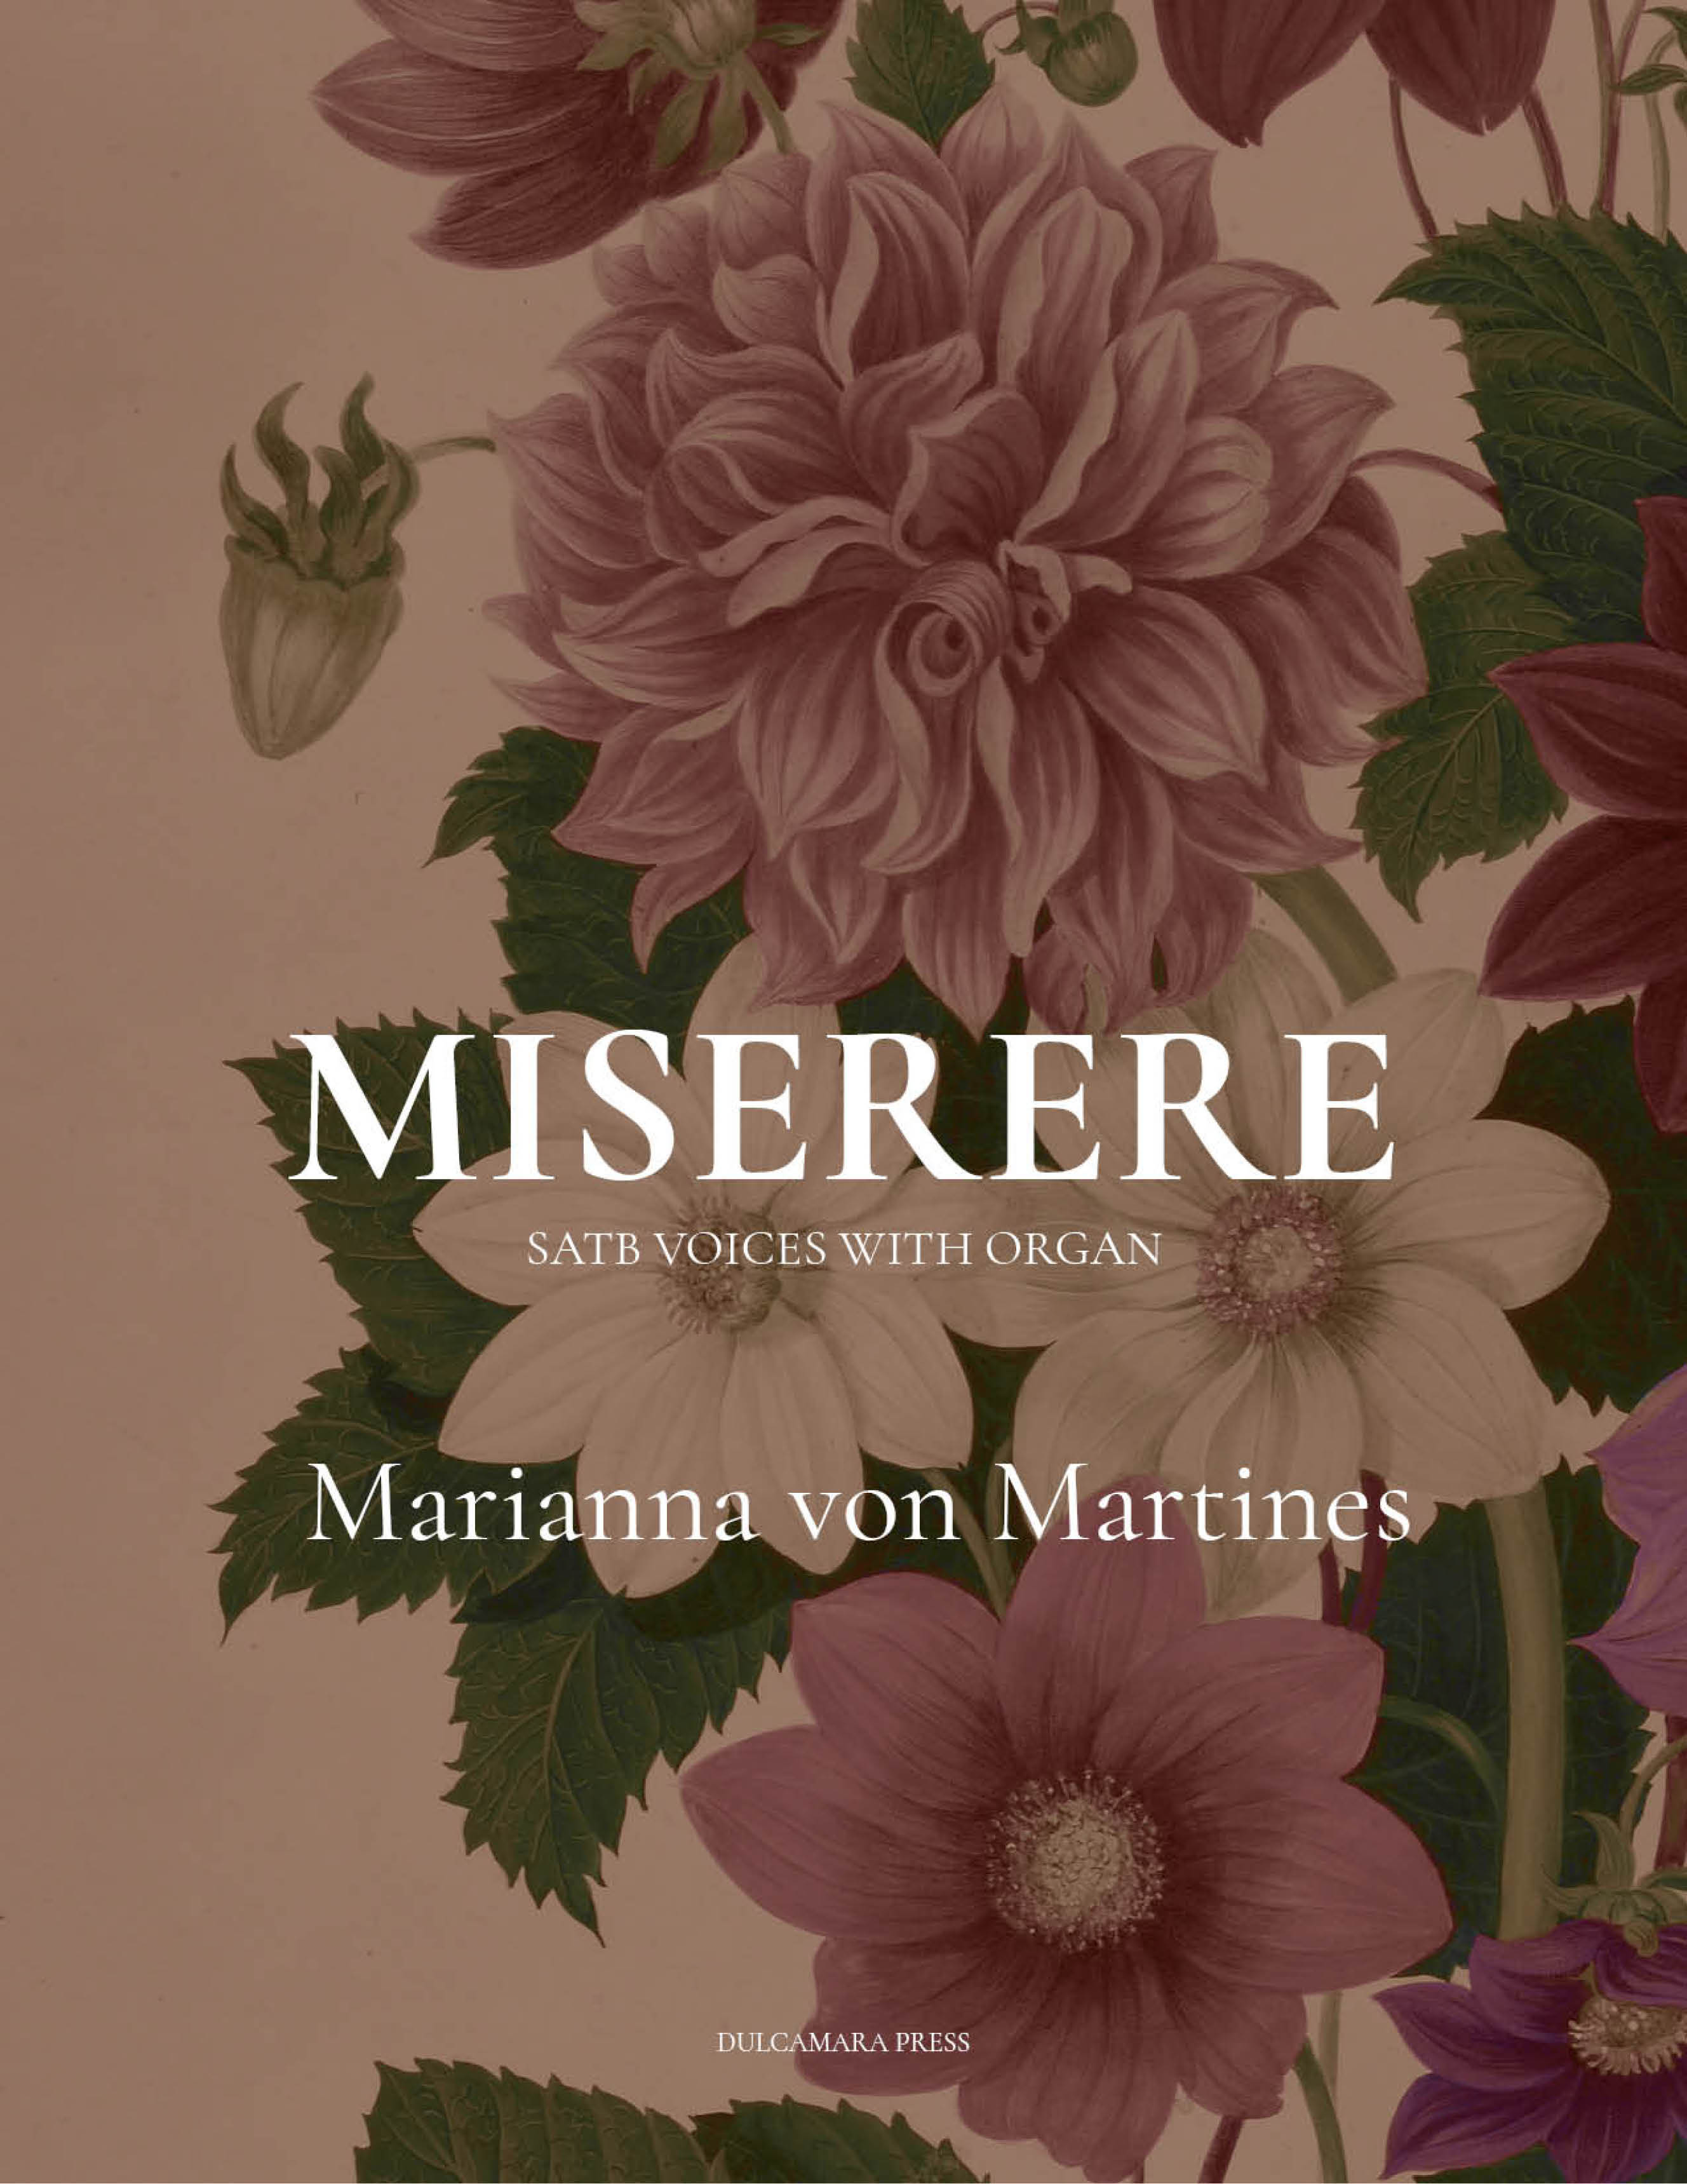 Miserere for choir and organ by Marianne Martines